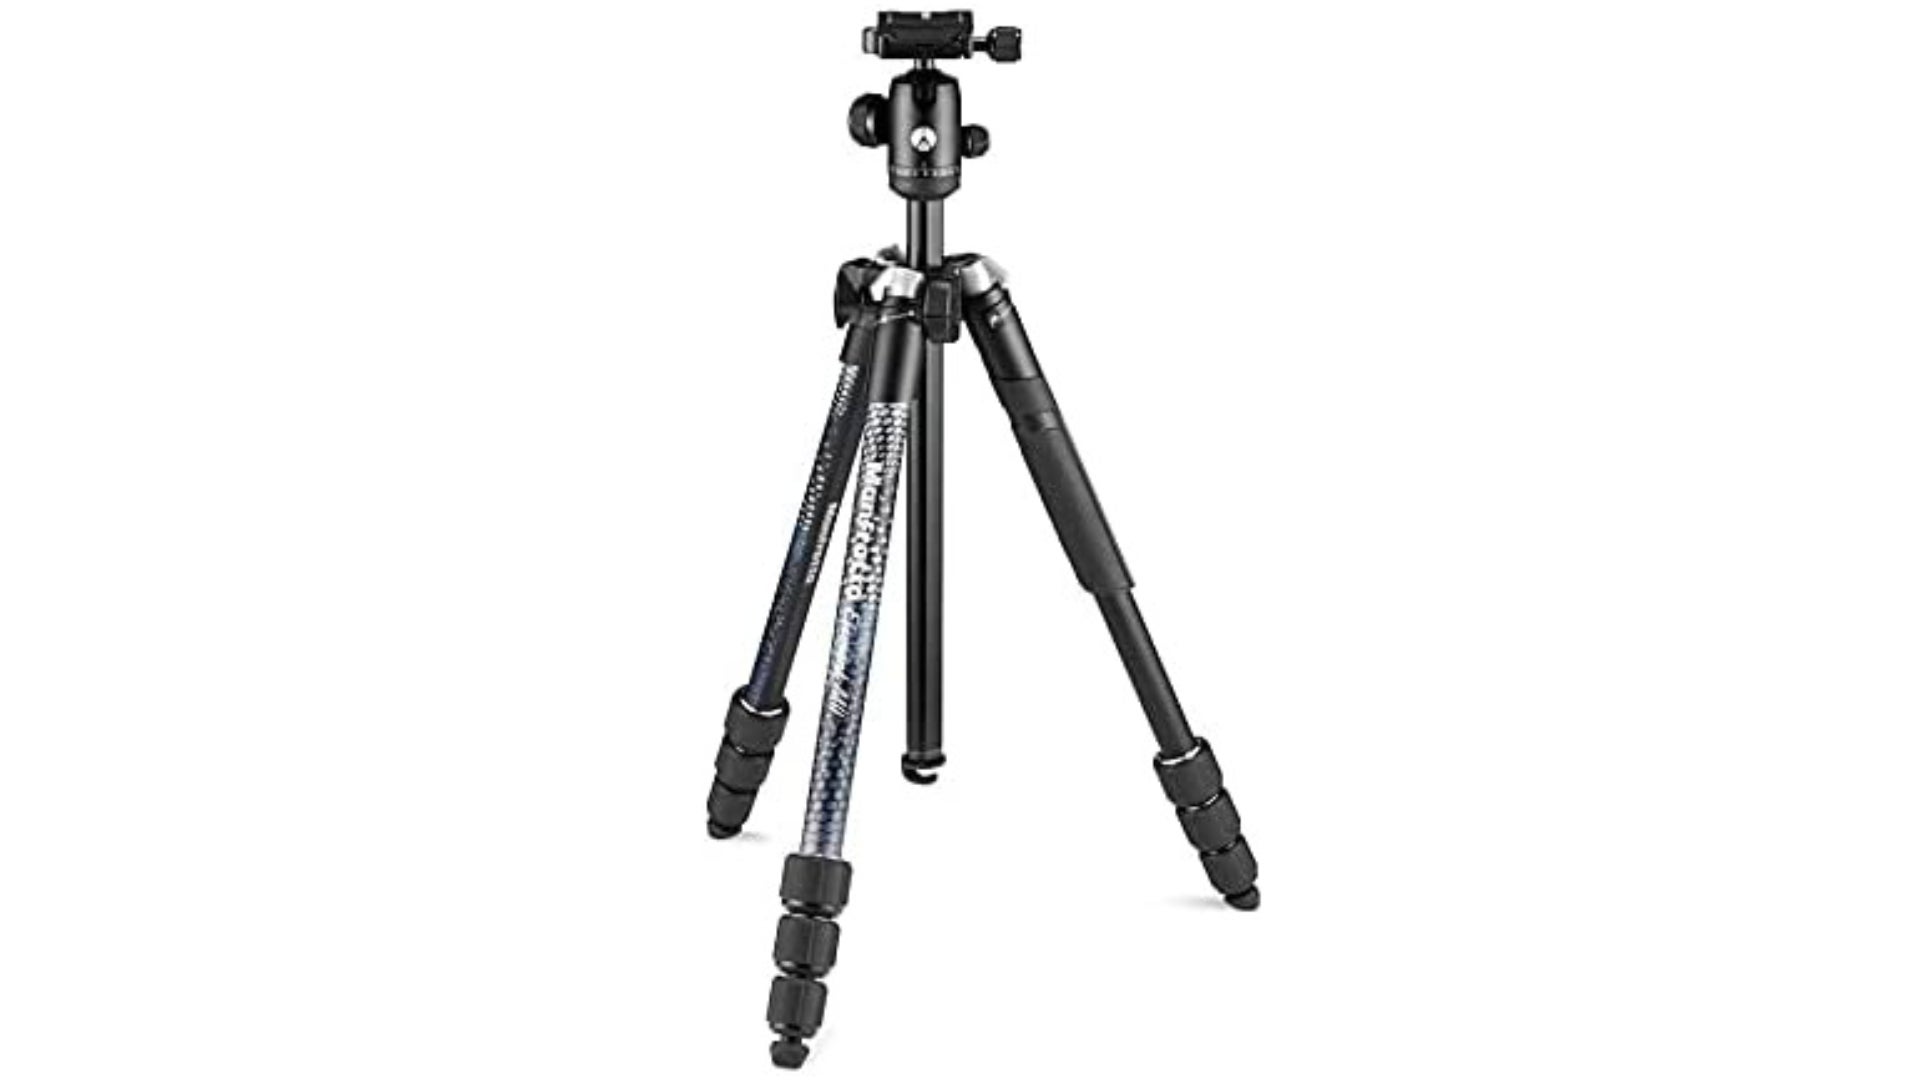 Mafrotto Element MII tripod. - Best phone tripods for video calls, vlogging, or live streaming